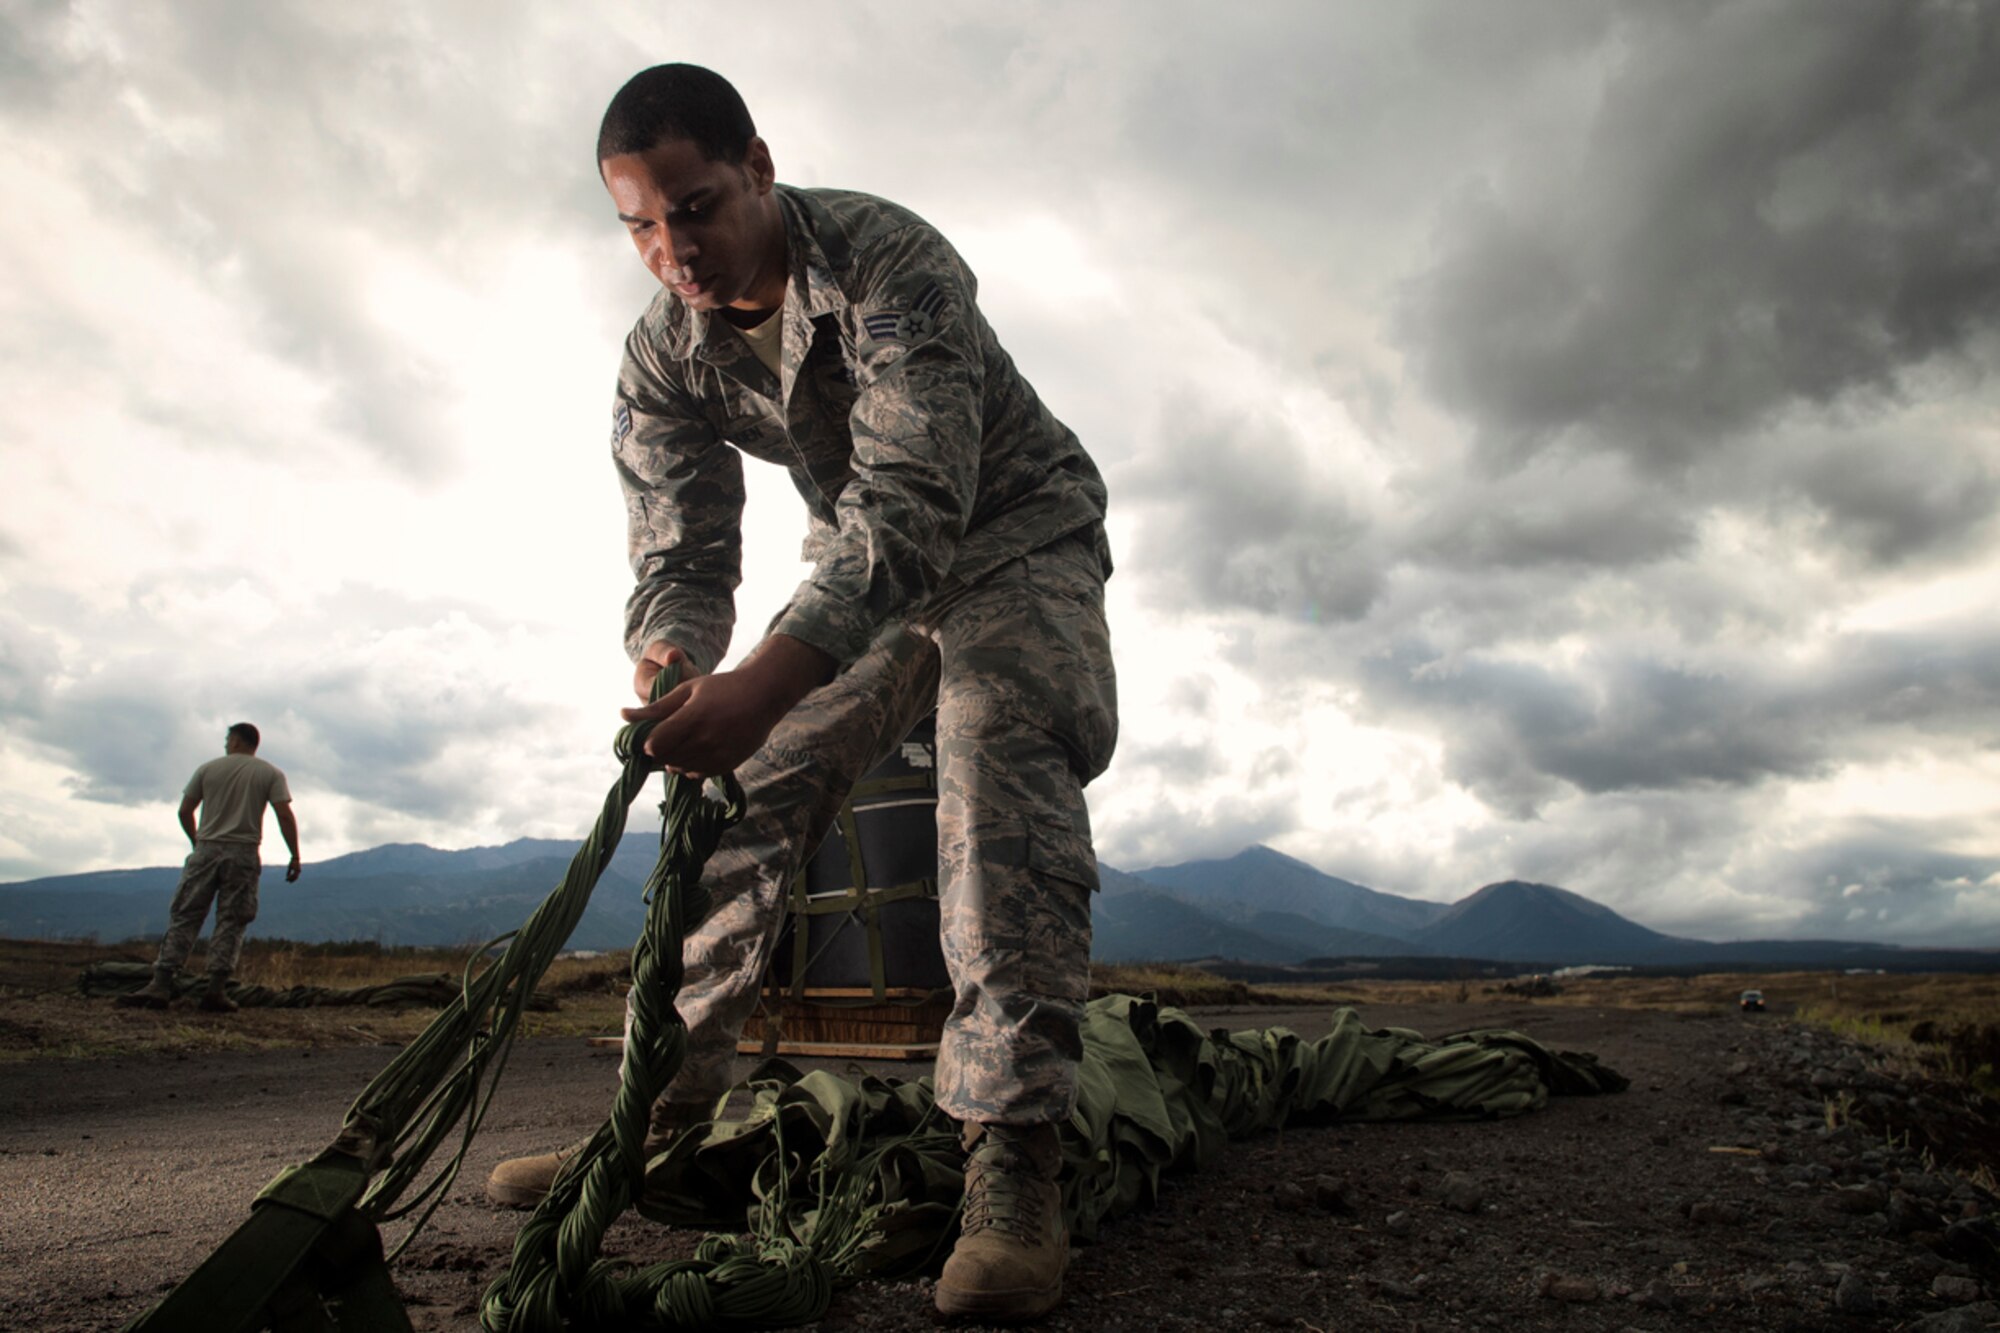 Senior Airman Brandon Roden, 374th Logistics Readiness Squadron combat mobility flight recovery specialist, recovers a parachute at Combined Armed Training Center Camp Fuji, Japan, April 12, 2017. Airmen with the 374th Logistics Readiness Squadron and Eagle airlifts with the 36th Airlift Squadron conducted mass CDS airdrop training. (U.S. Air Force photo by Yasuo Osakabe)